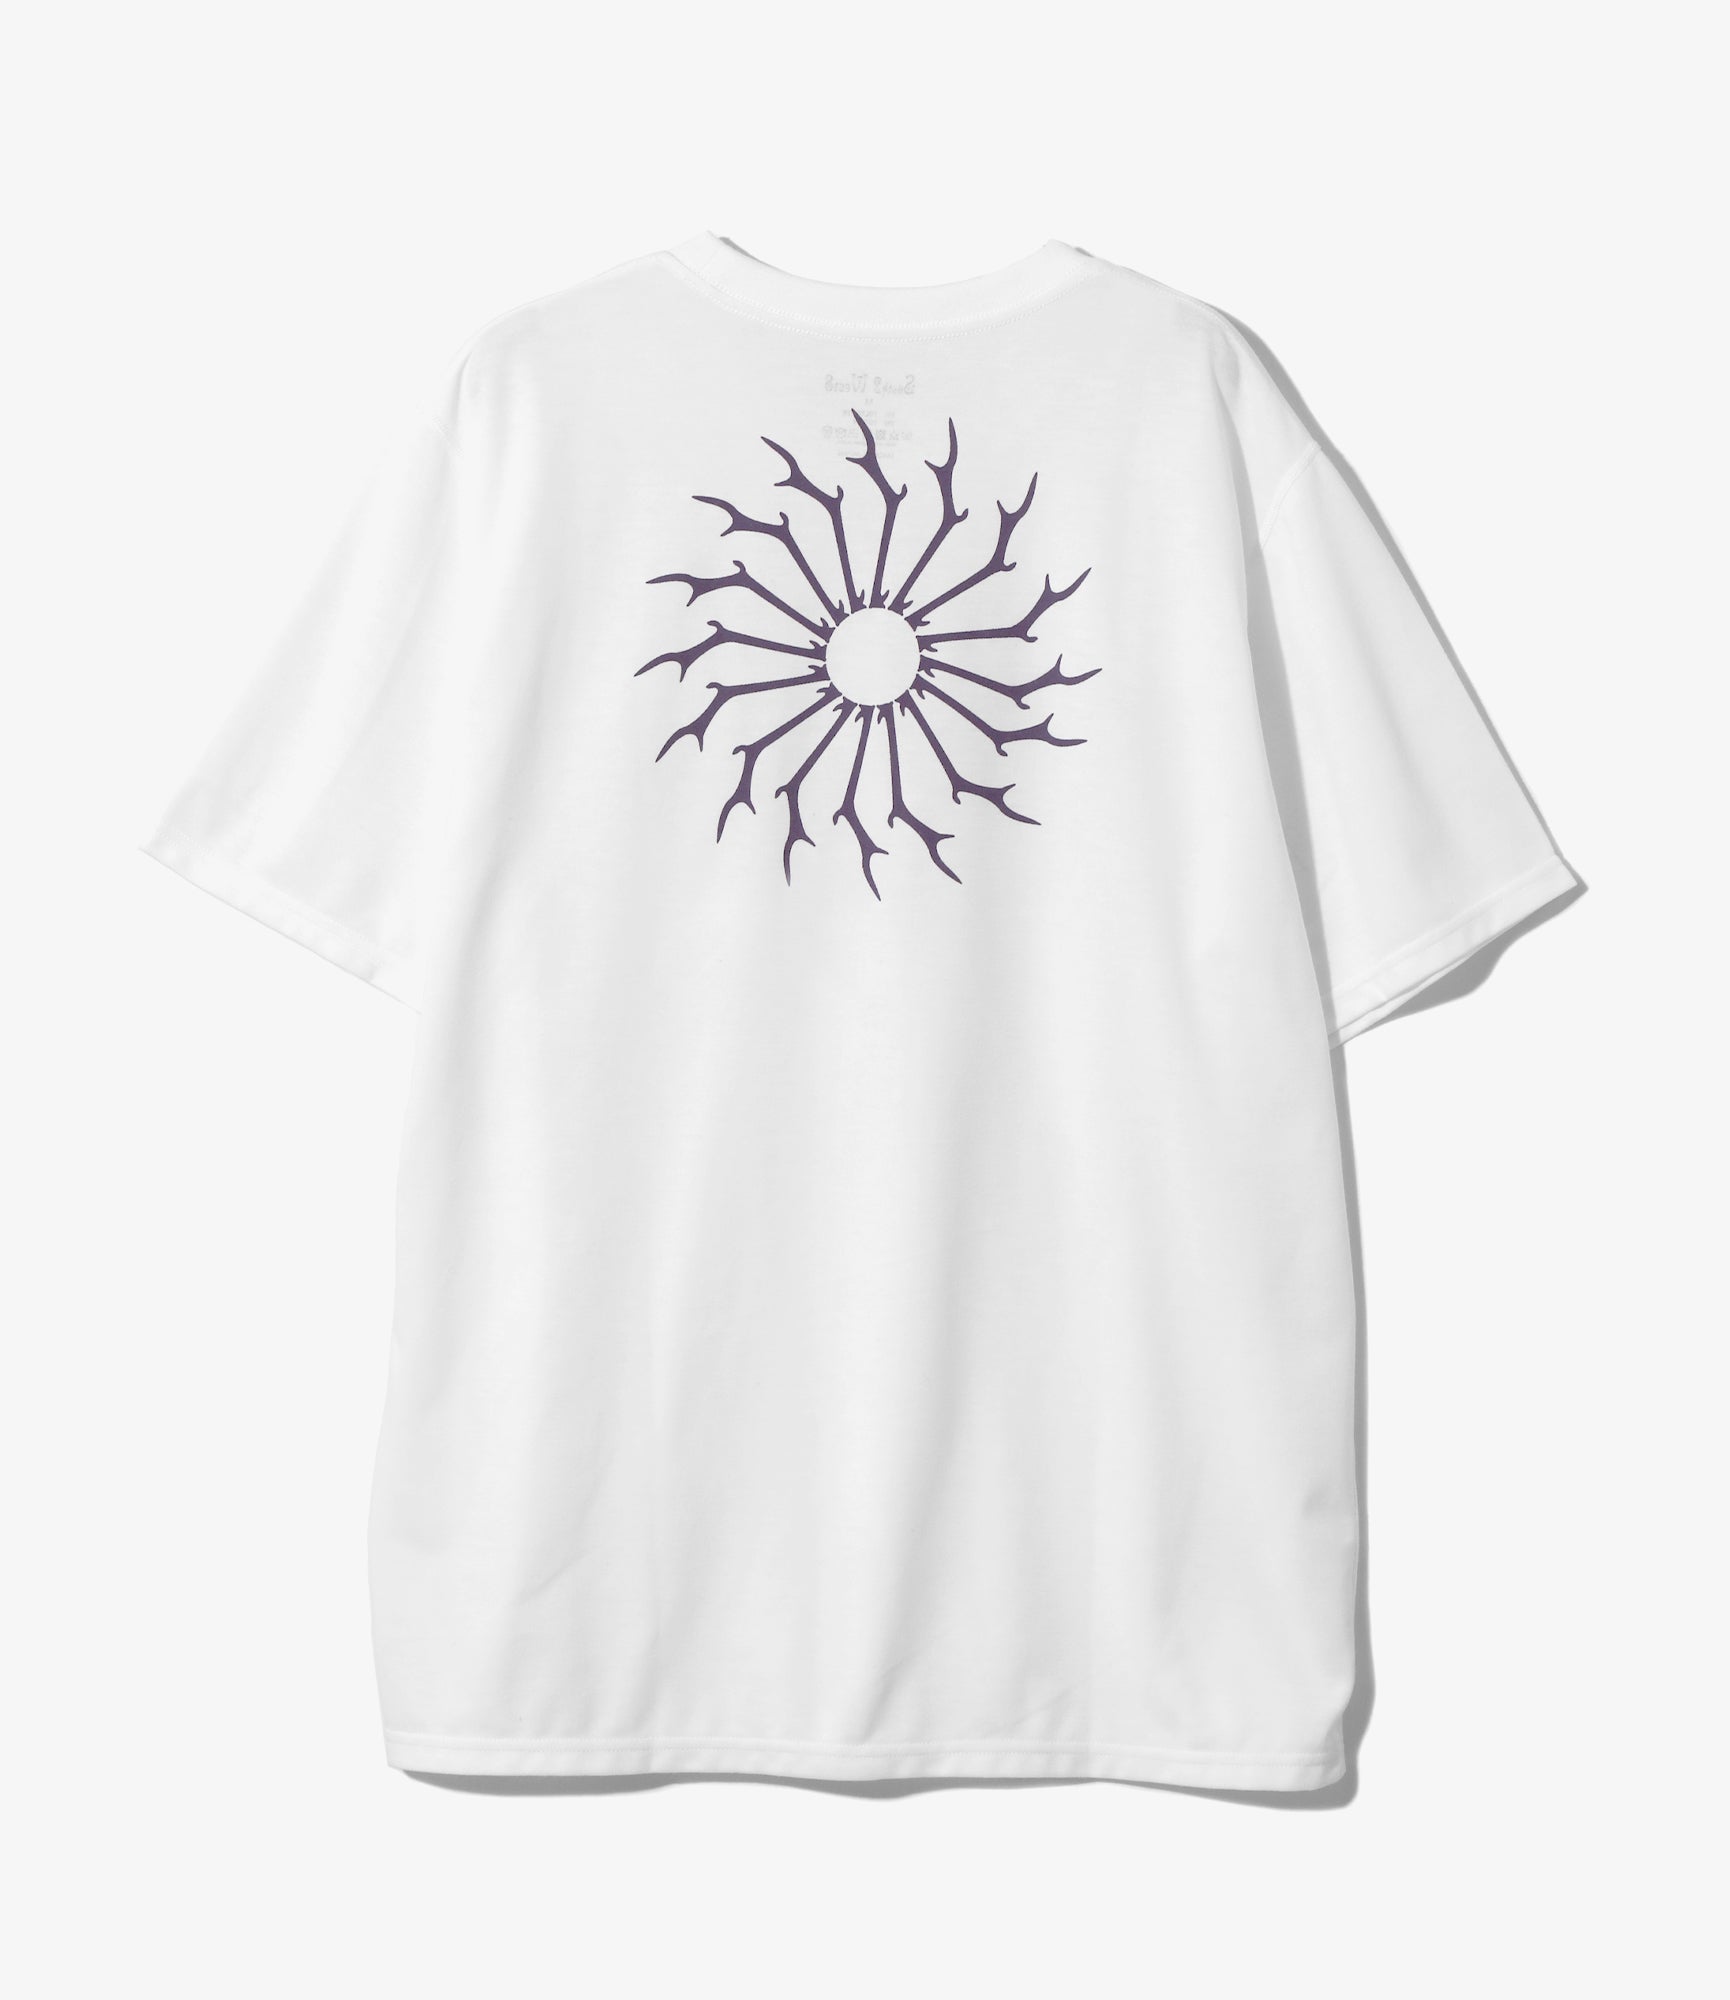 South2 West8 S/S Round Pocket Tee - Circle Horn - White